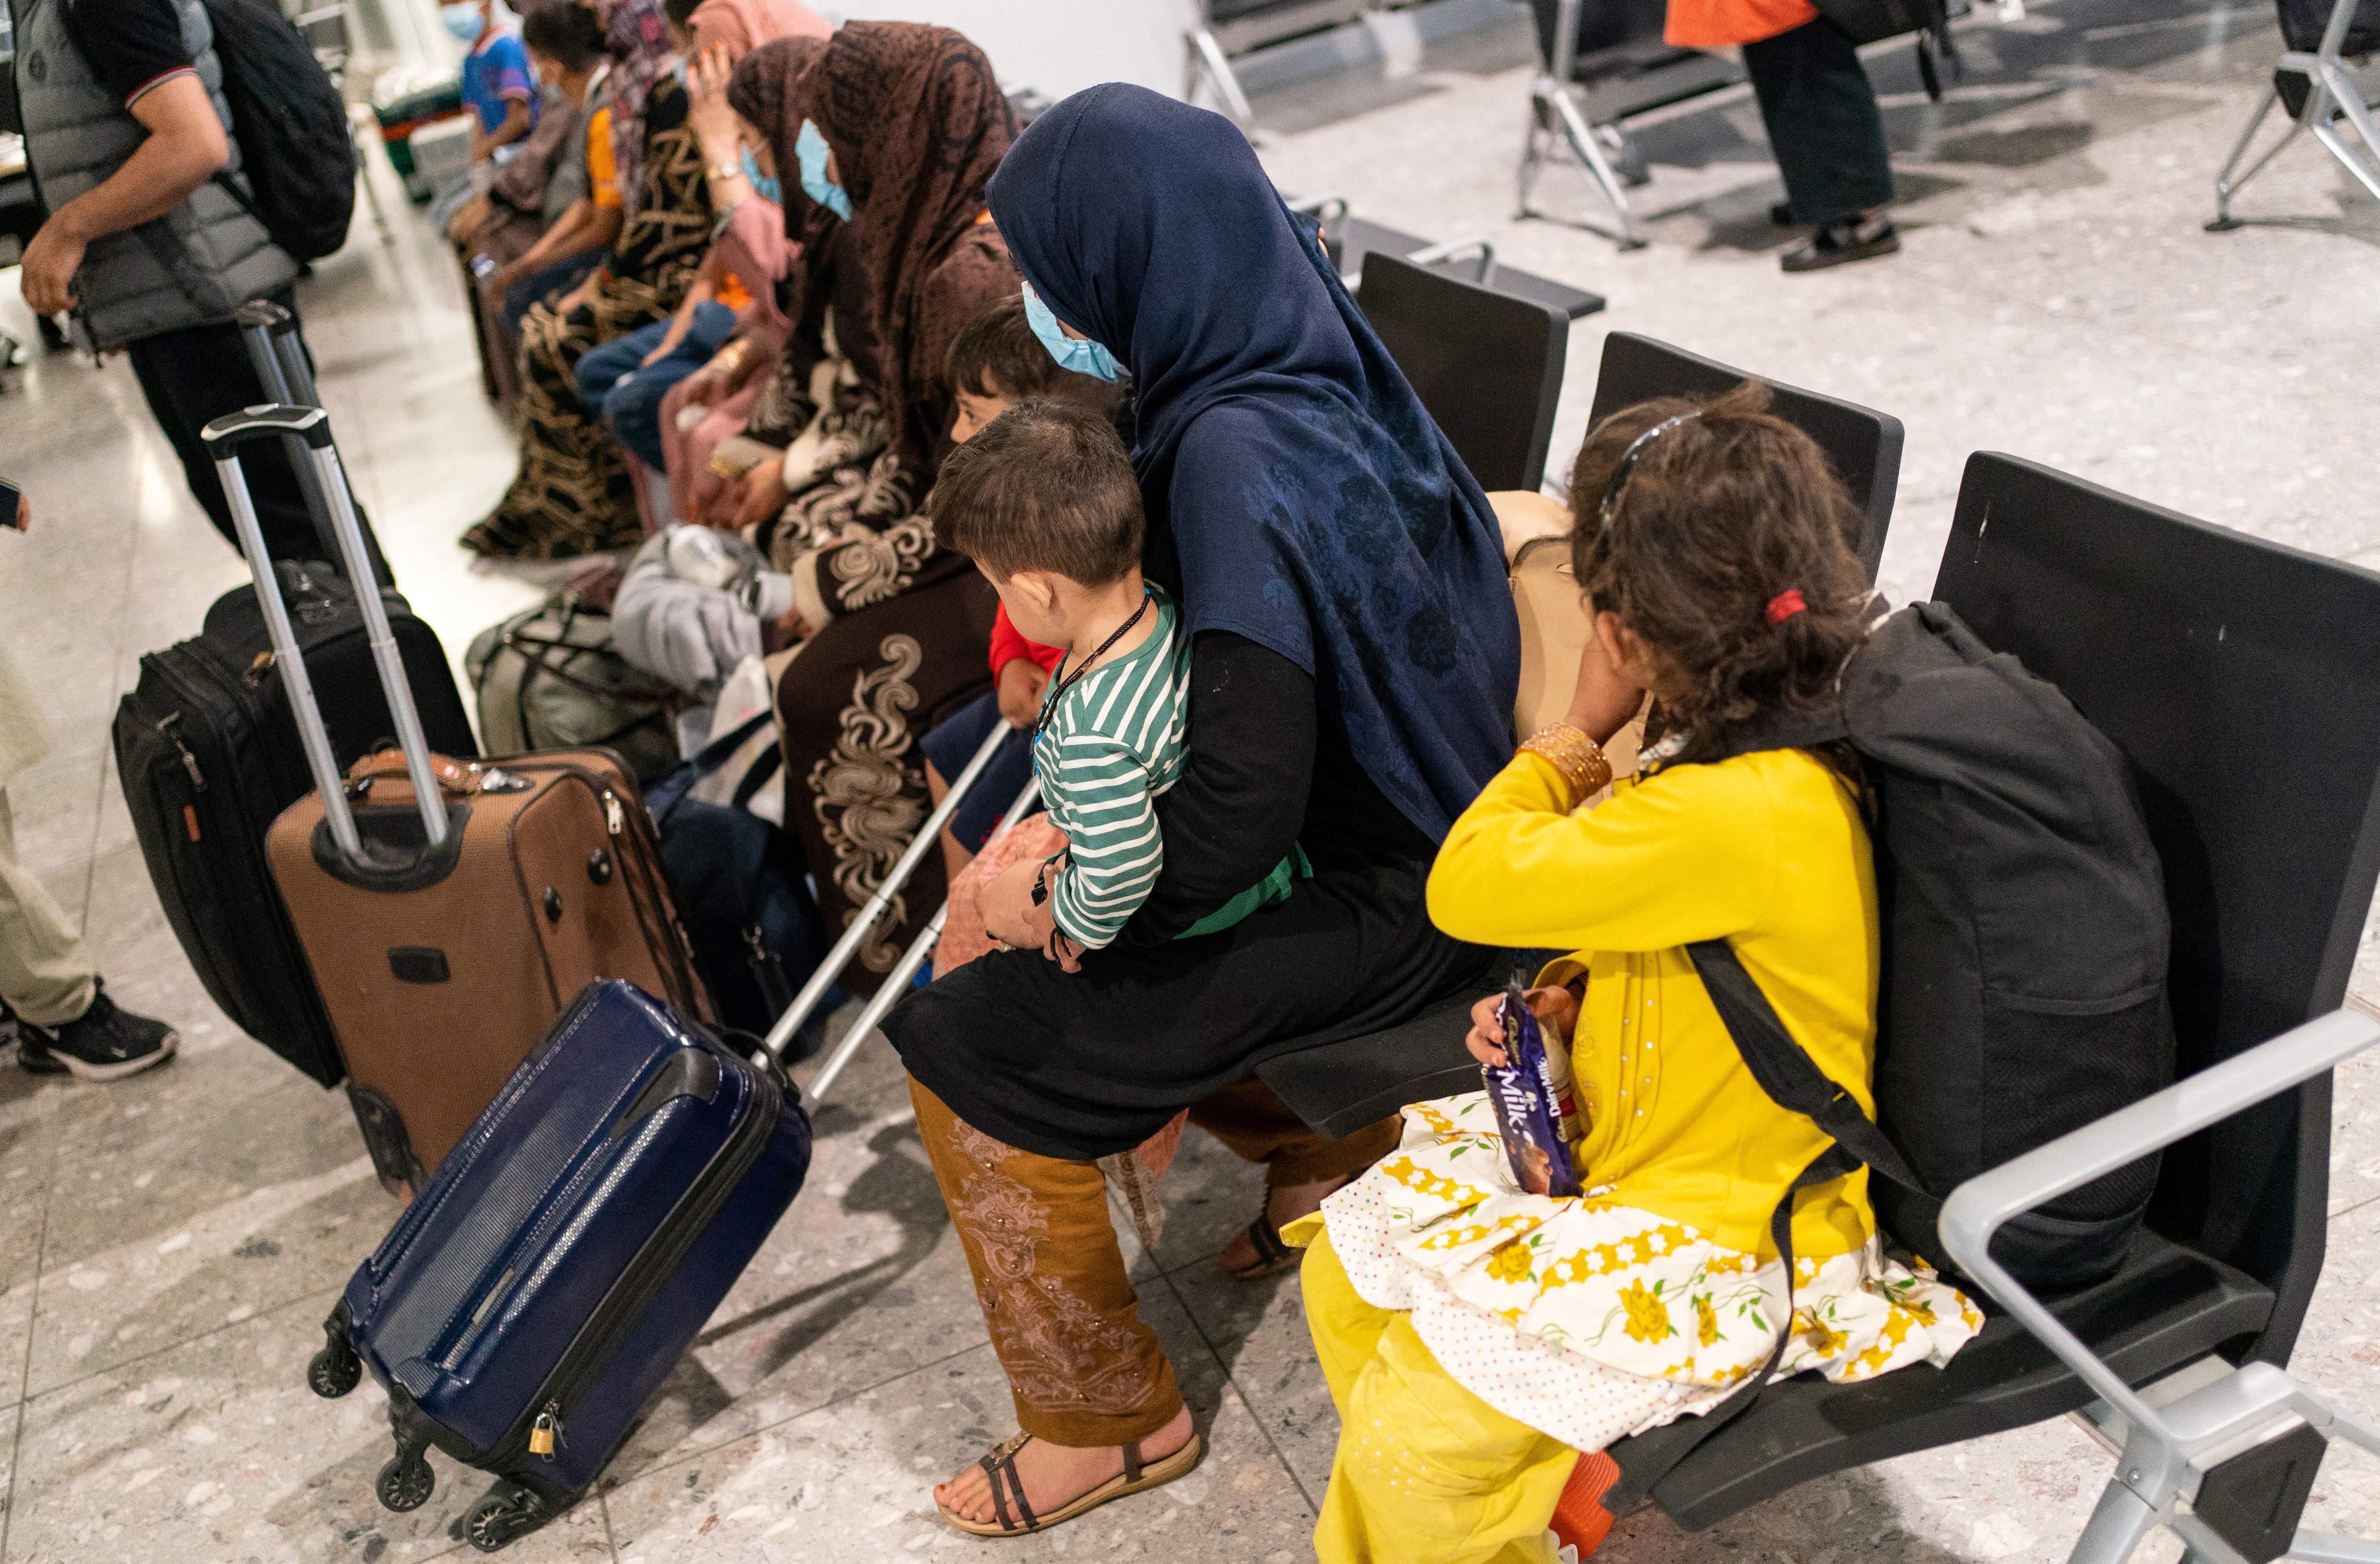 Afghan refugees wait to be processed at Heathrow airport after arriving on an evacuation flight from Afghanistan